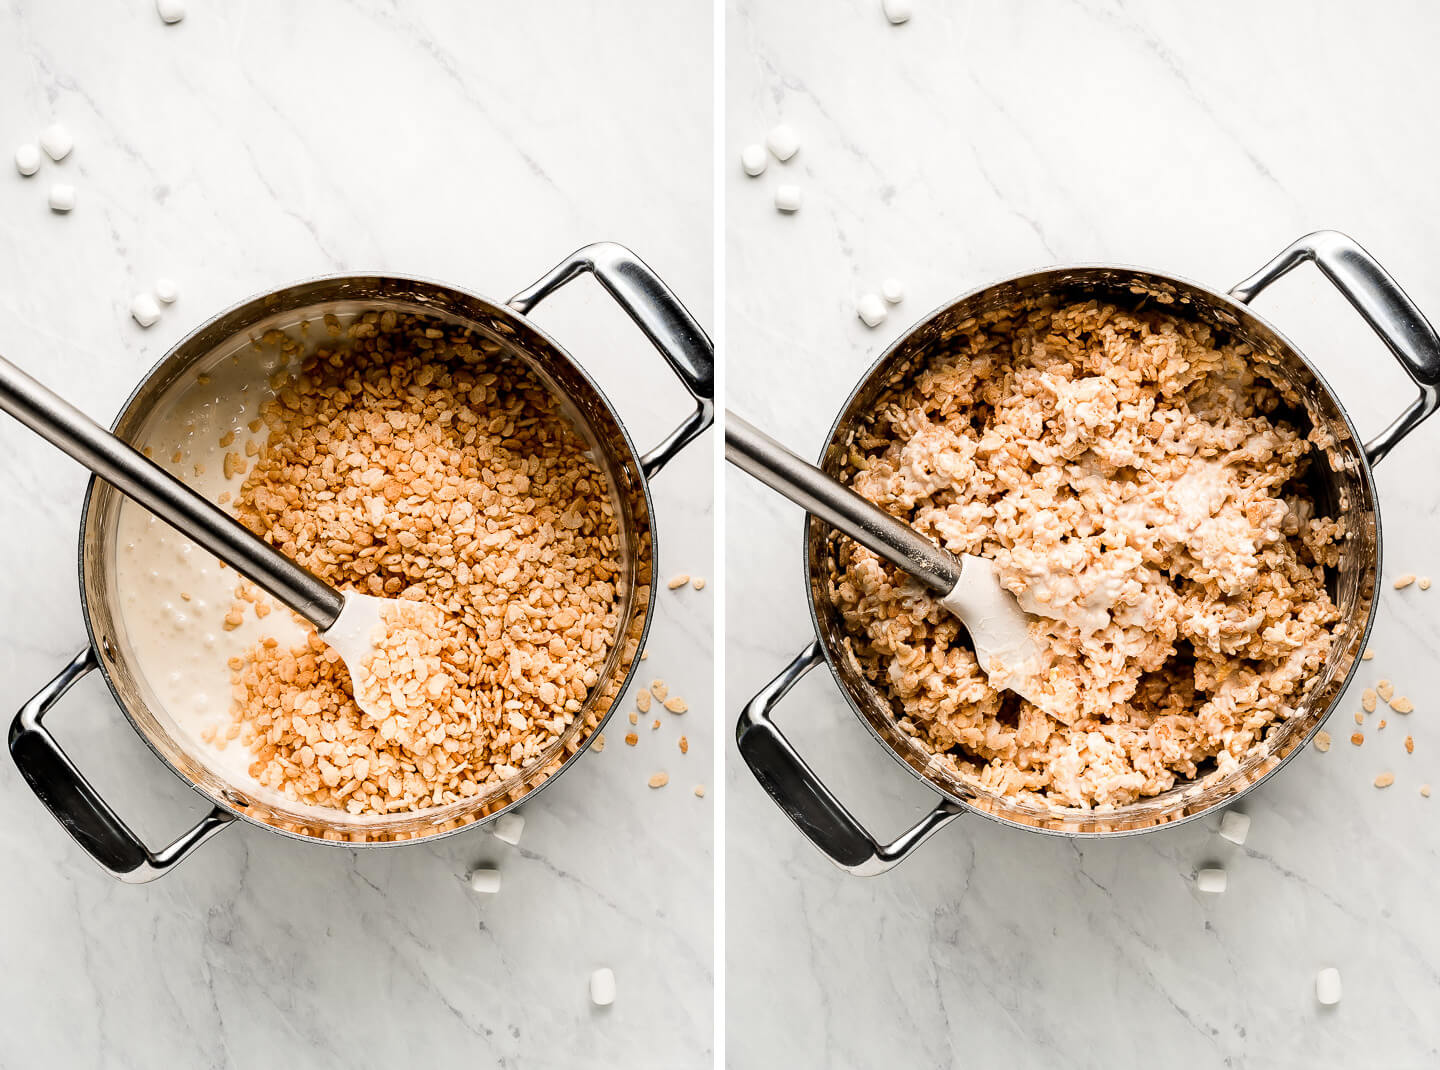 Diptych- Melted marshmallows in a pot with rice cereal on top; mixed together.